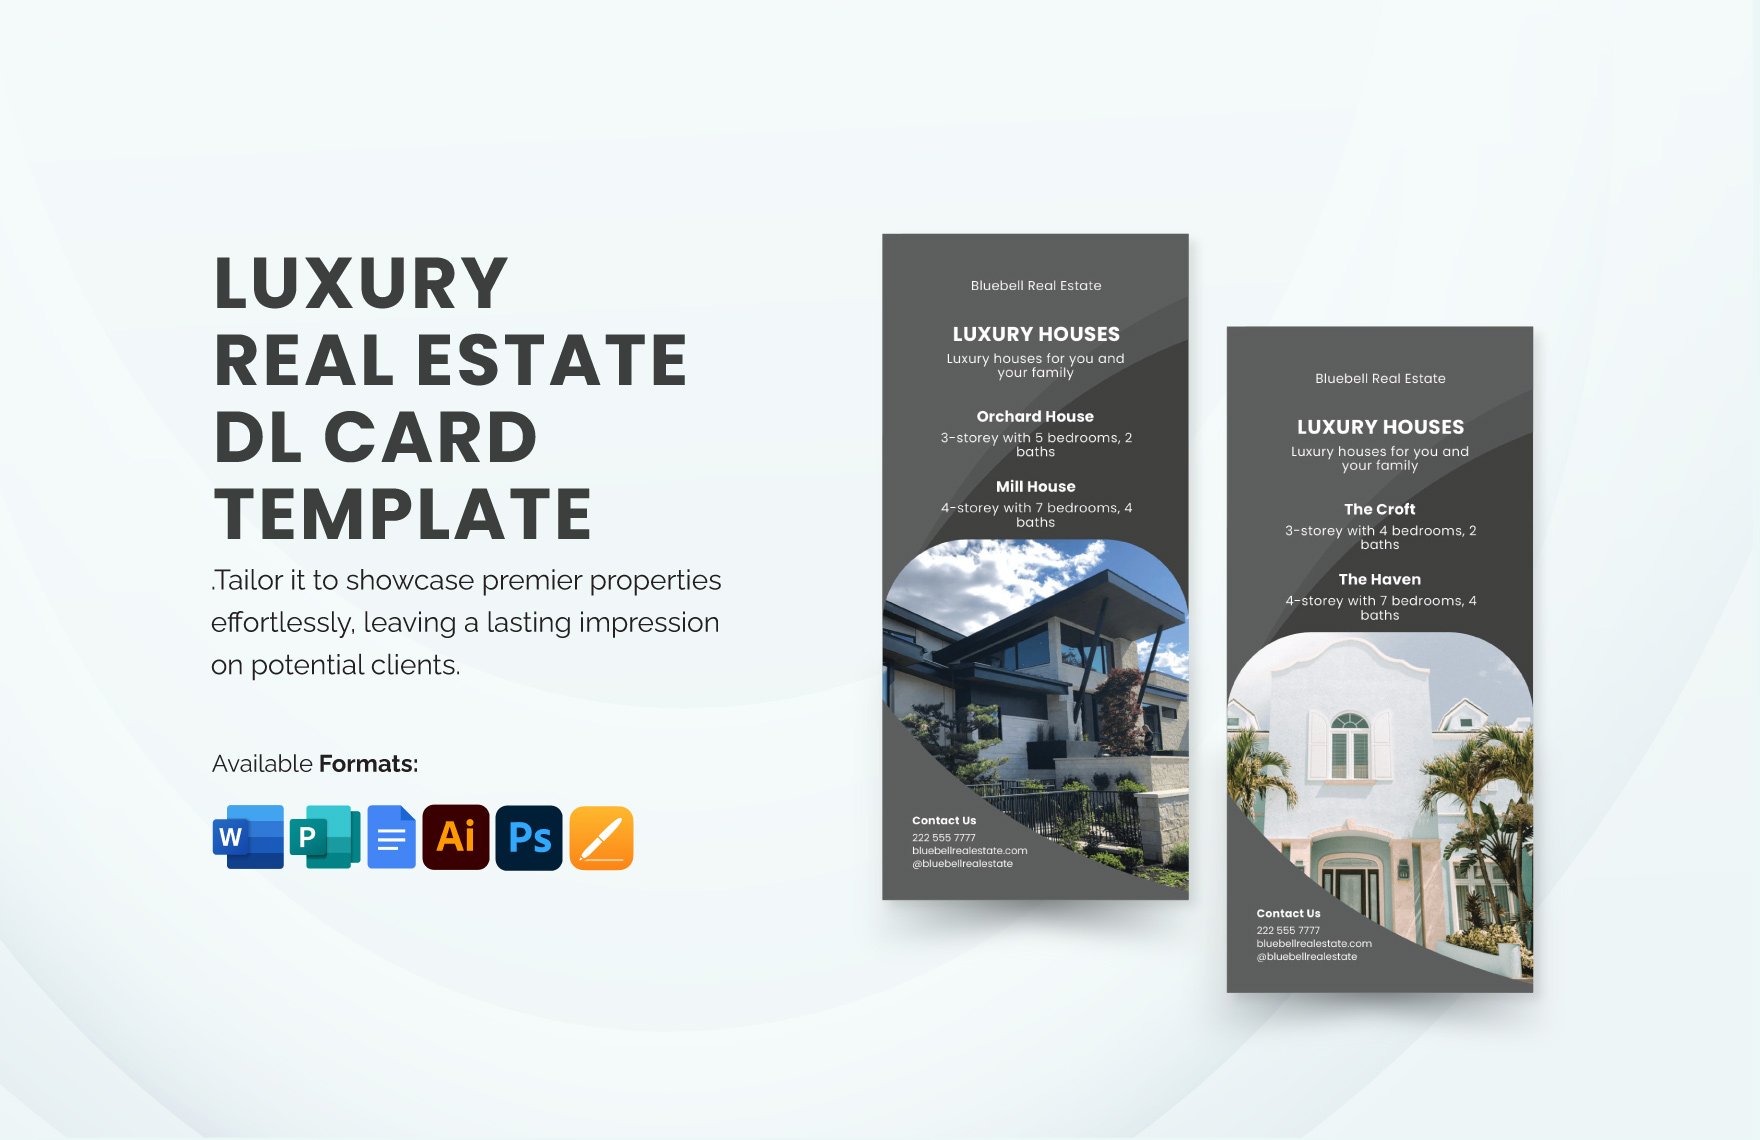 Luxury Real Estate DL Card template